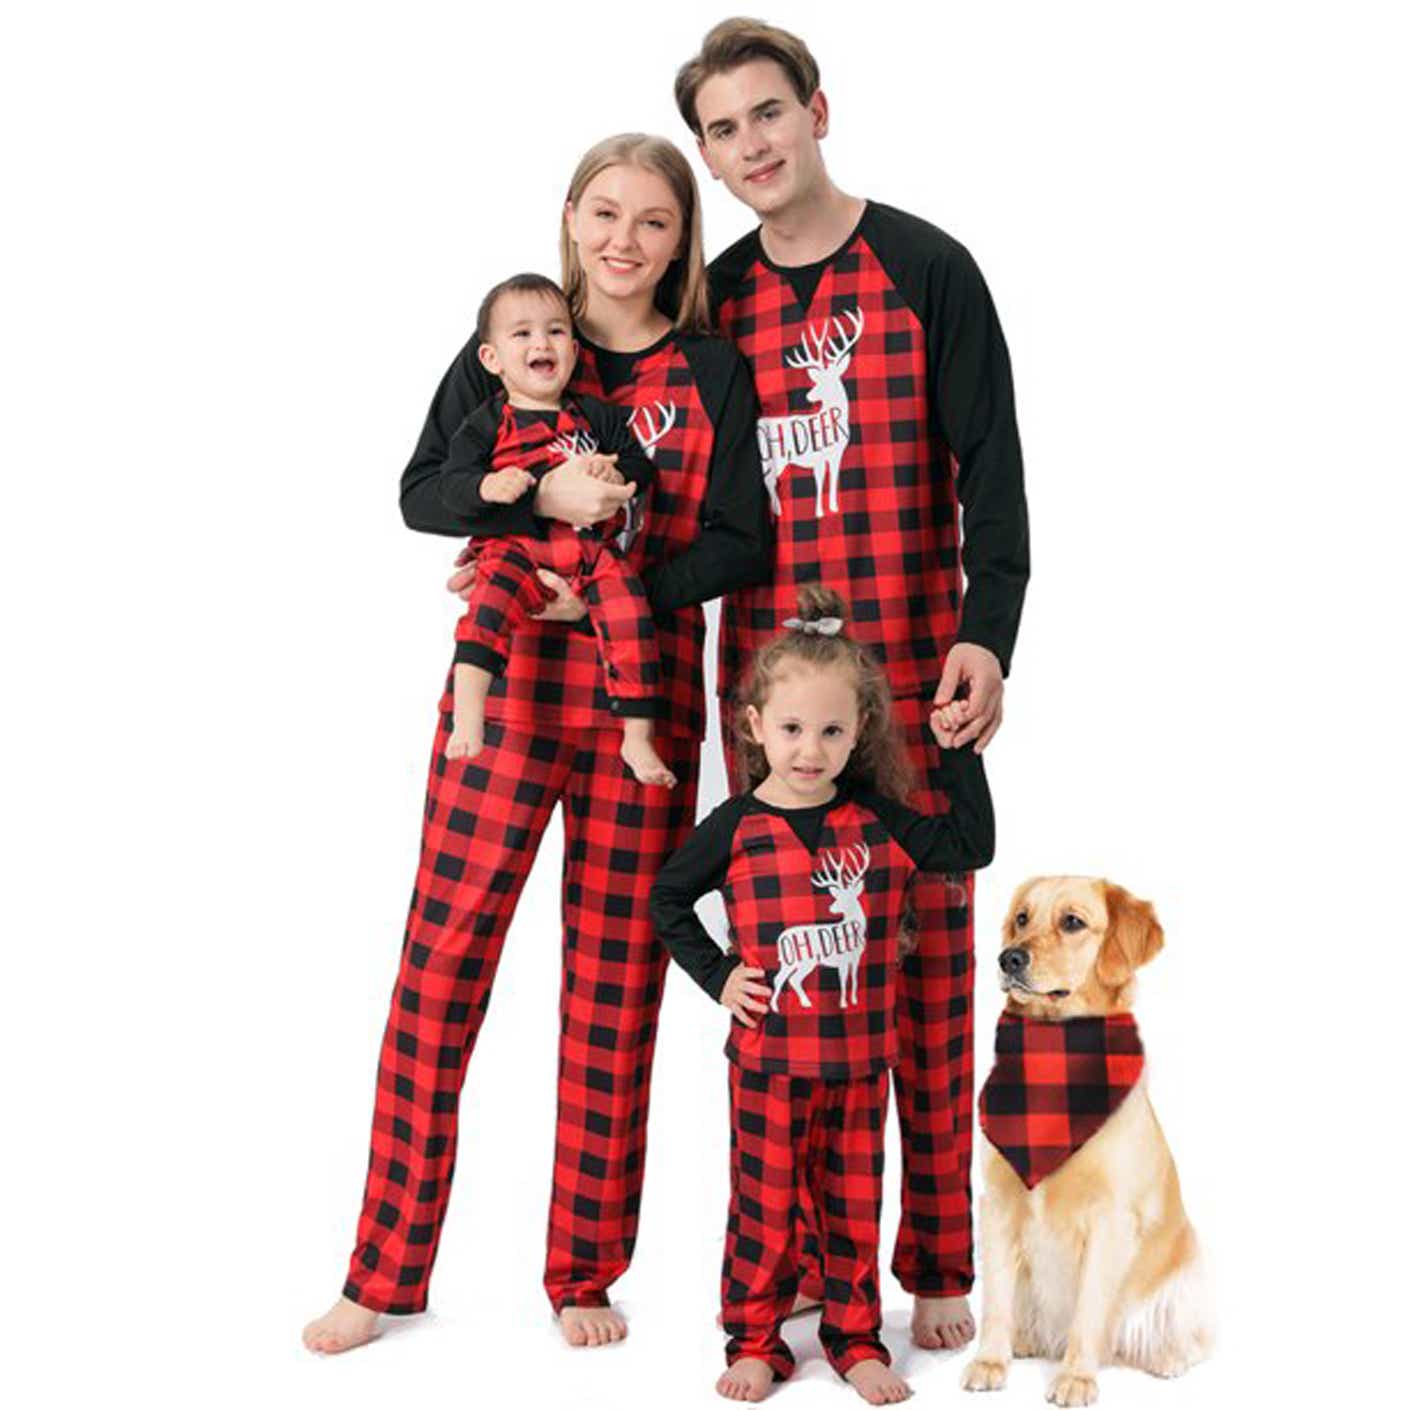 13 Best Matching Family Pajamas: Christmas PJs for Couples & Families